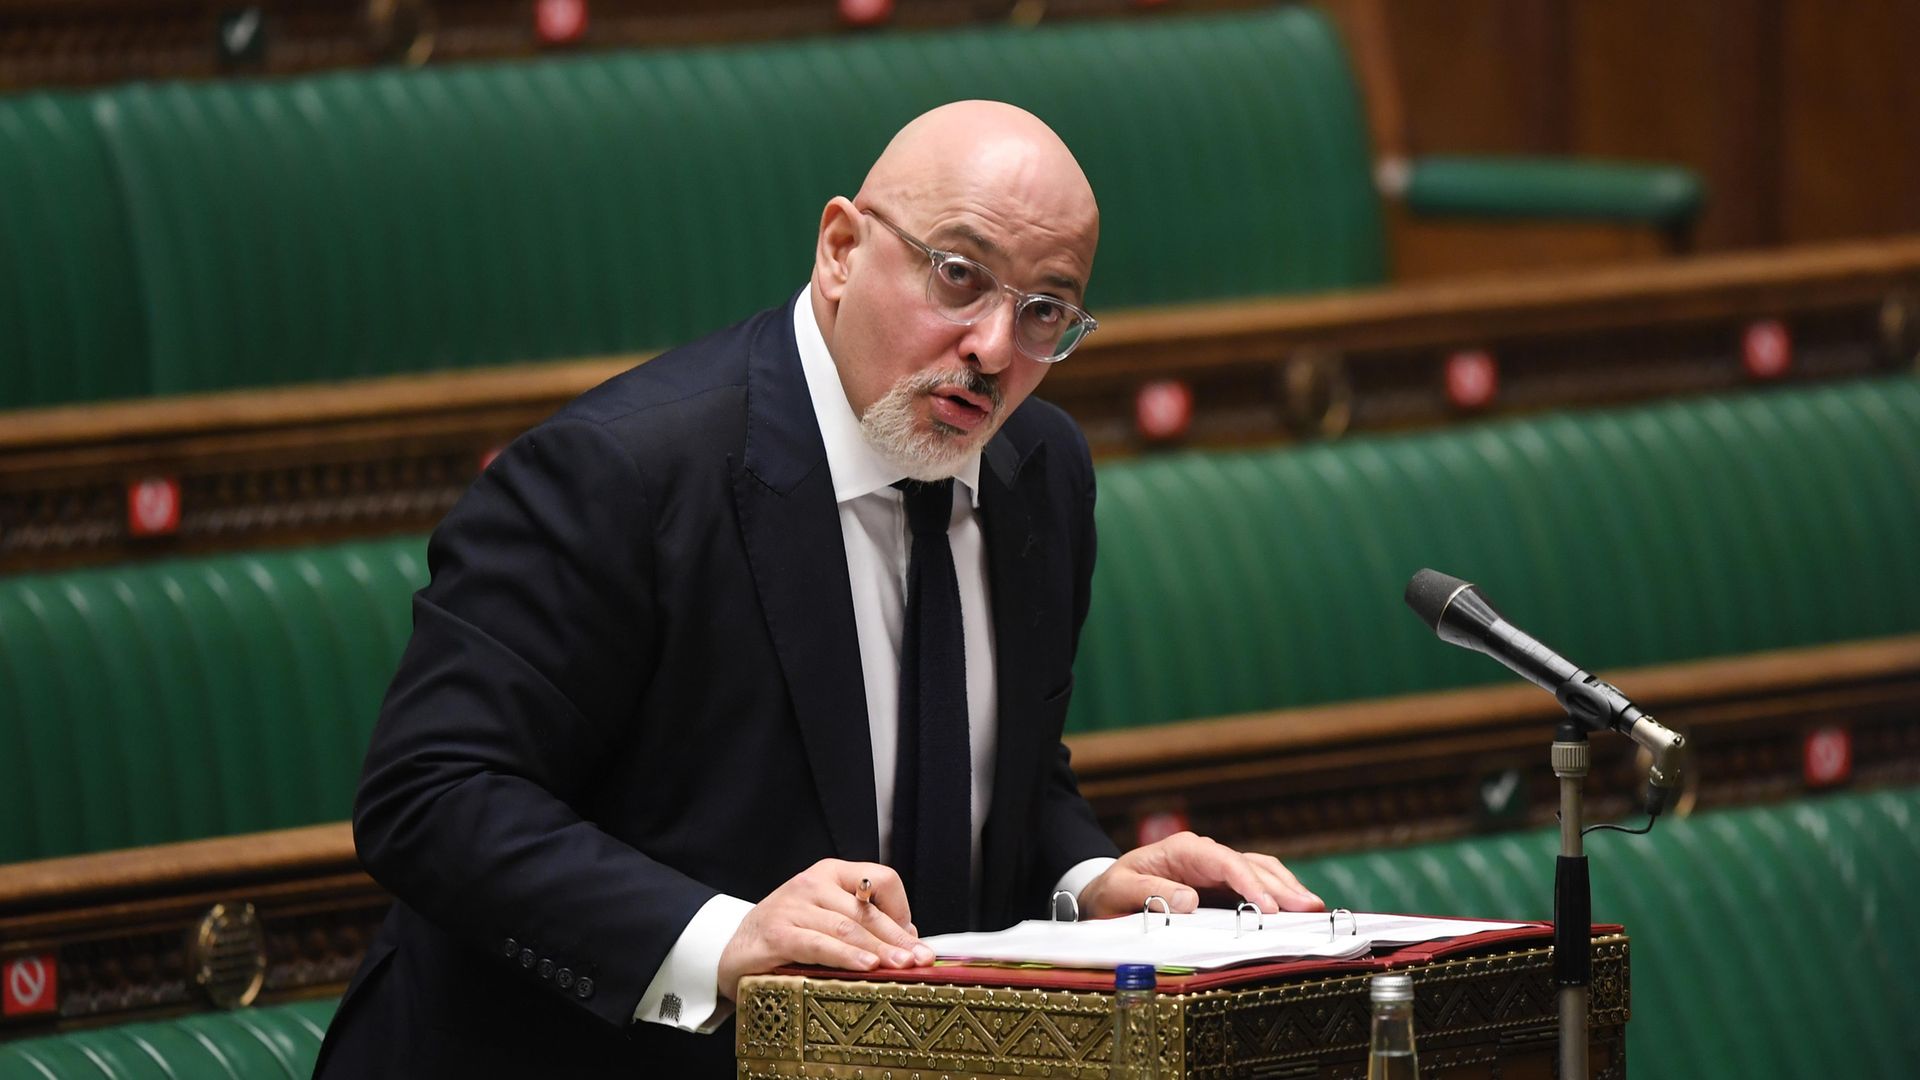 Nadhim Zahawi in the House of Commons. Photo: PA